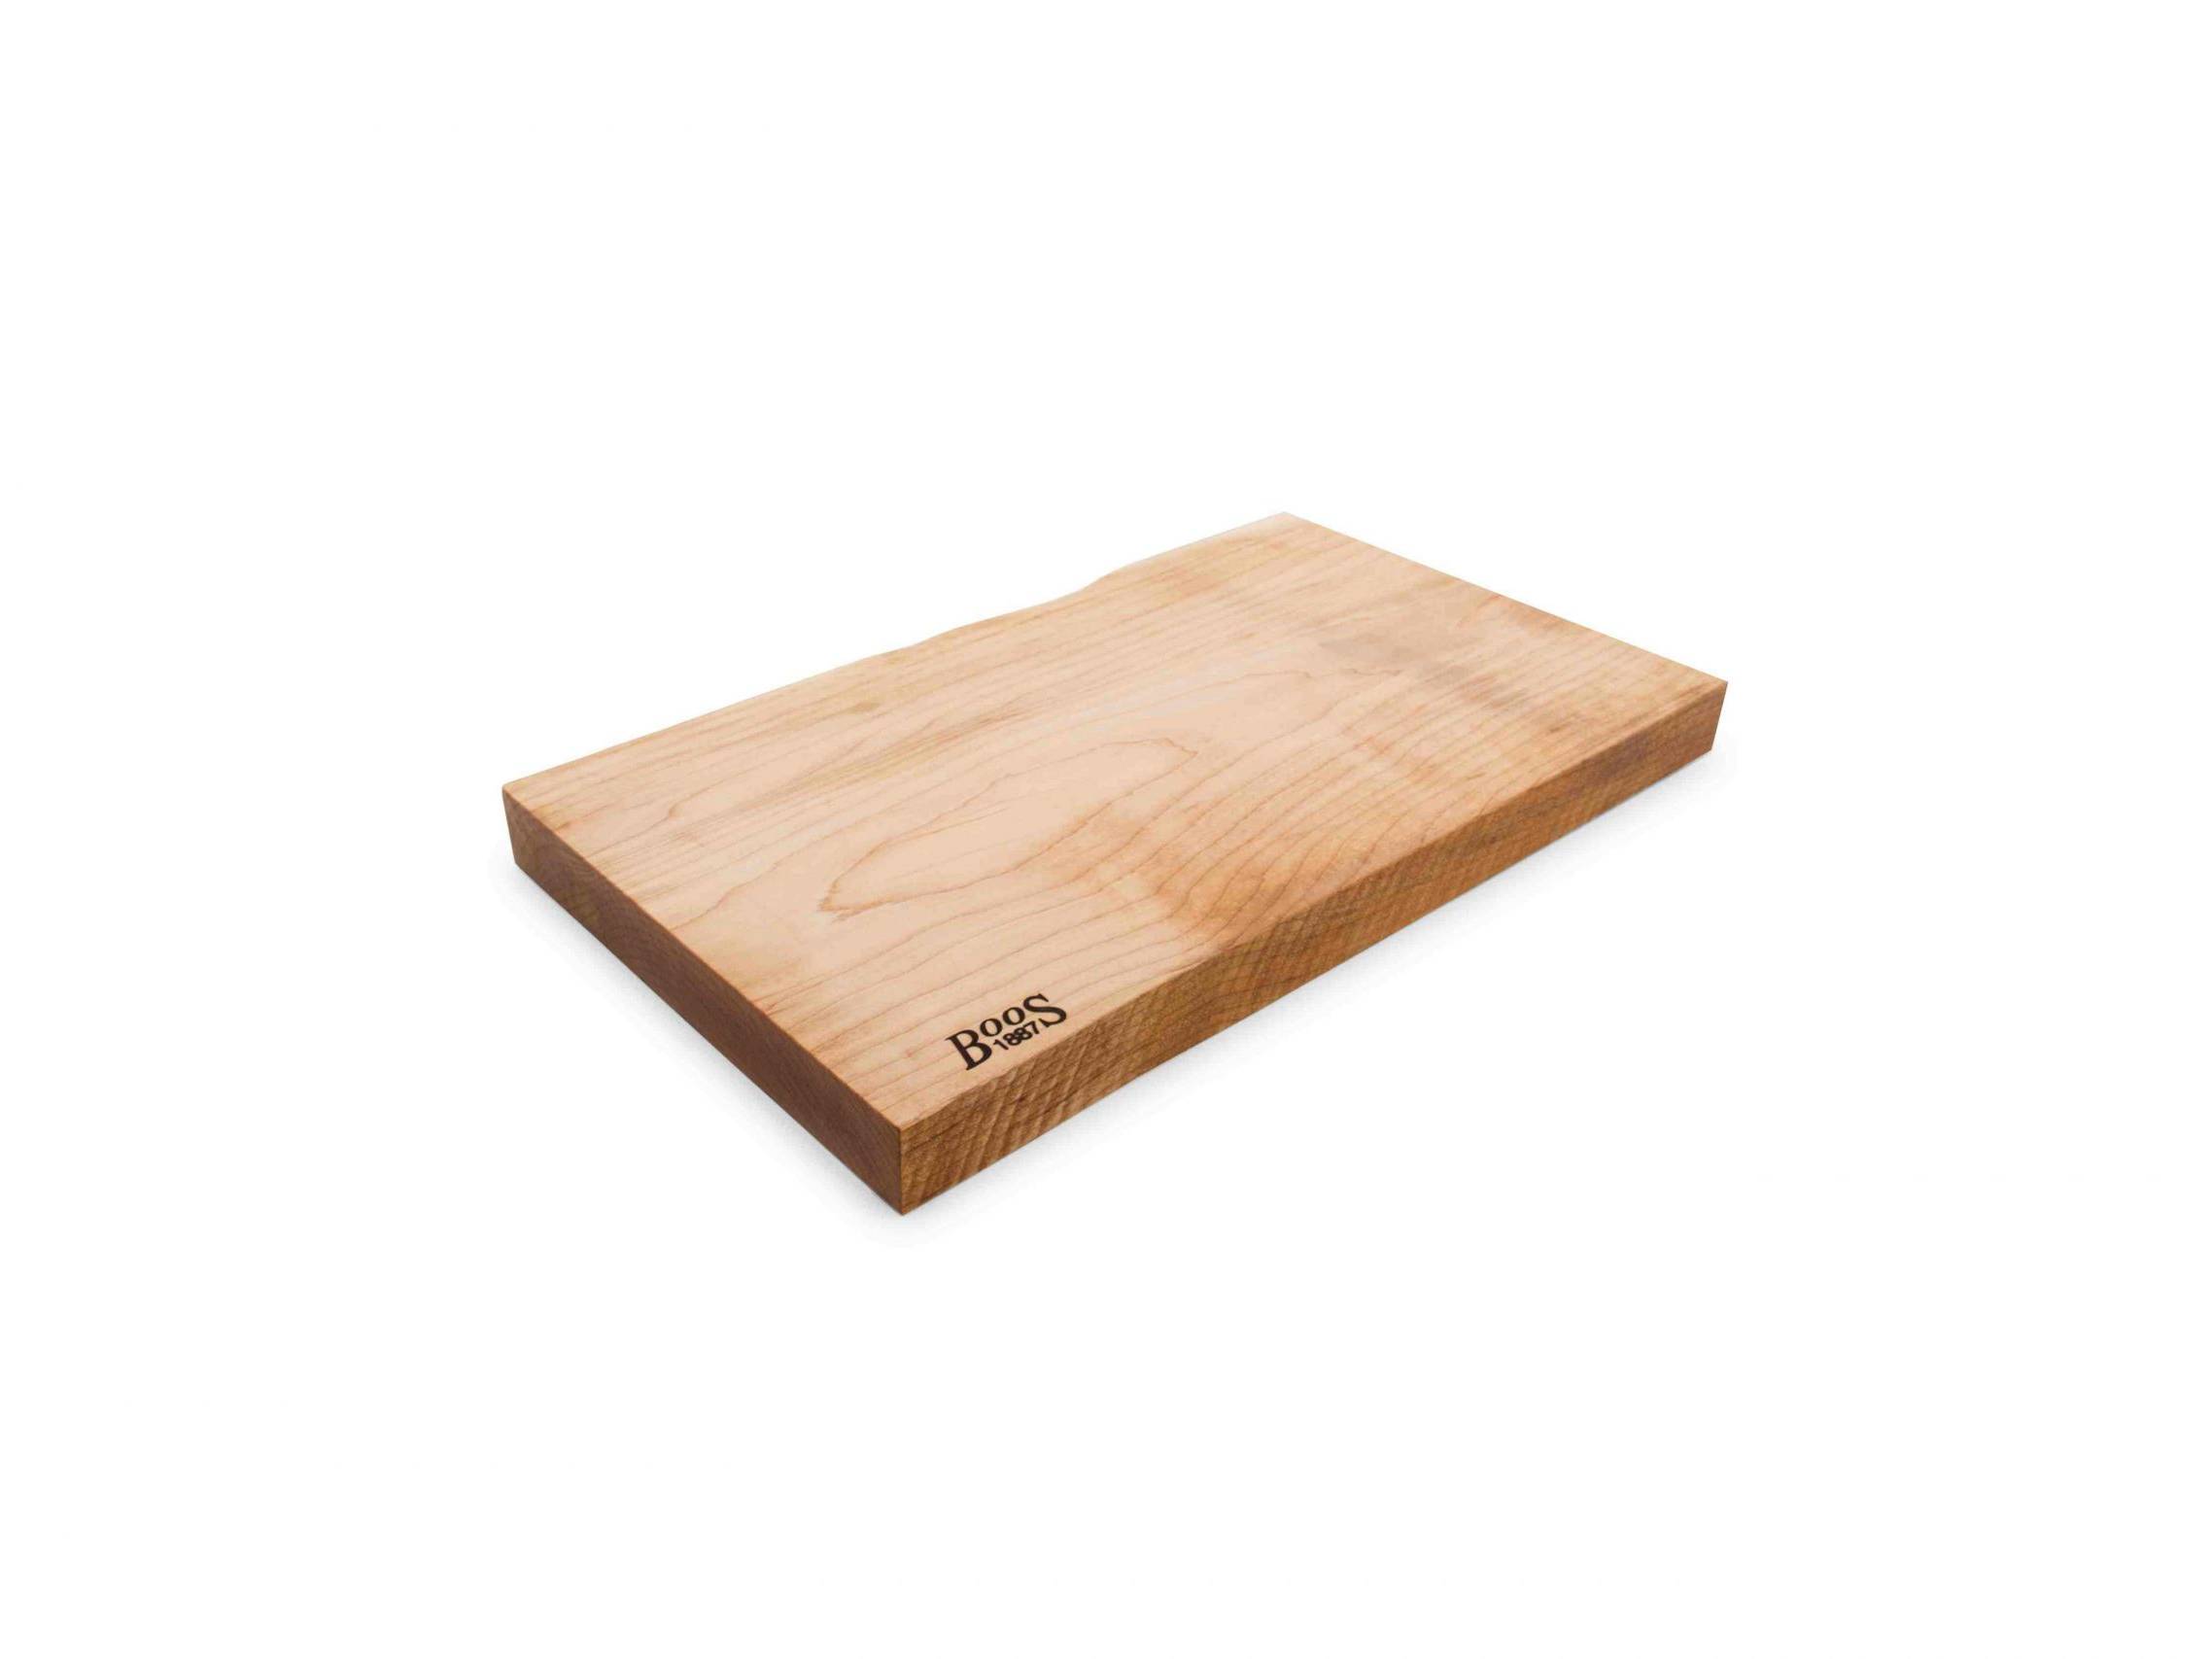 Boos 1887 / Rustic Edge one piece cutting board; hard maple; can be used on both sides 59